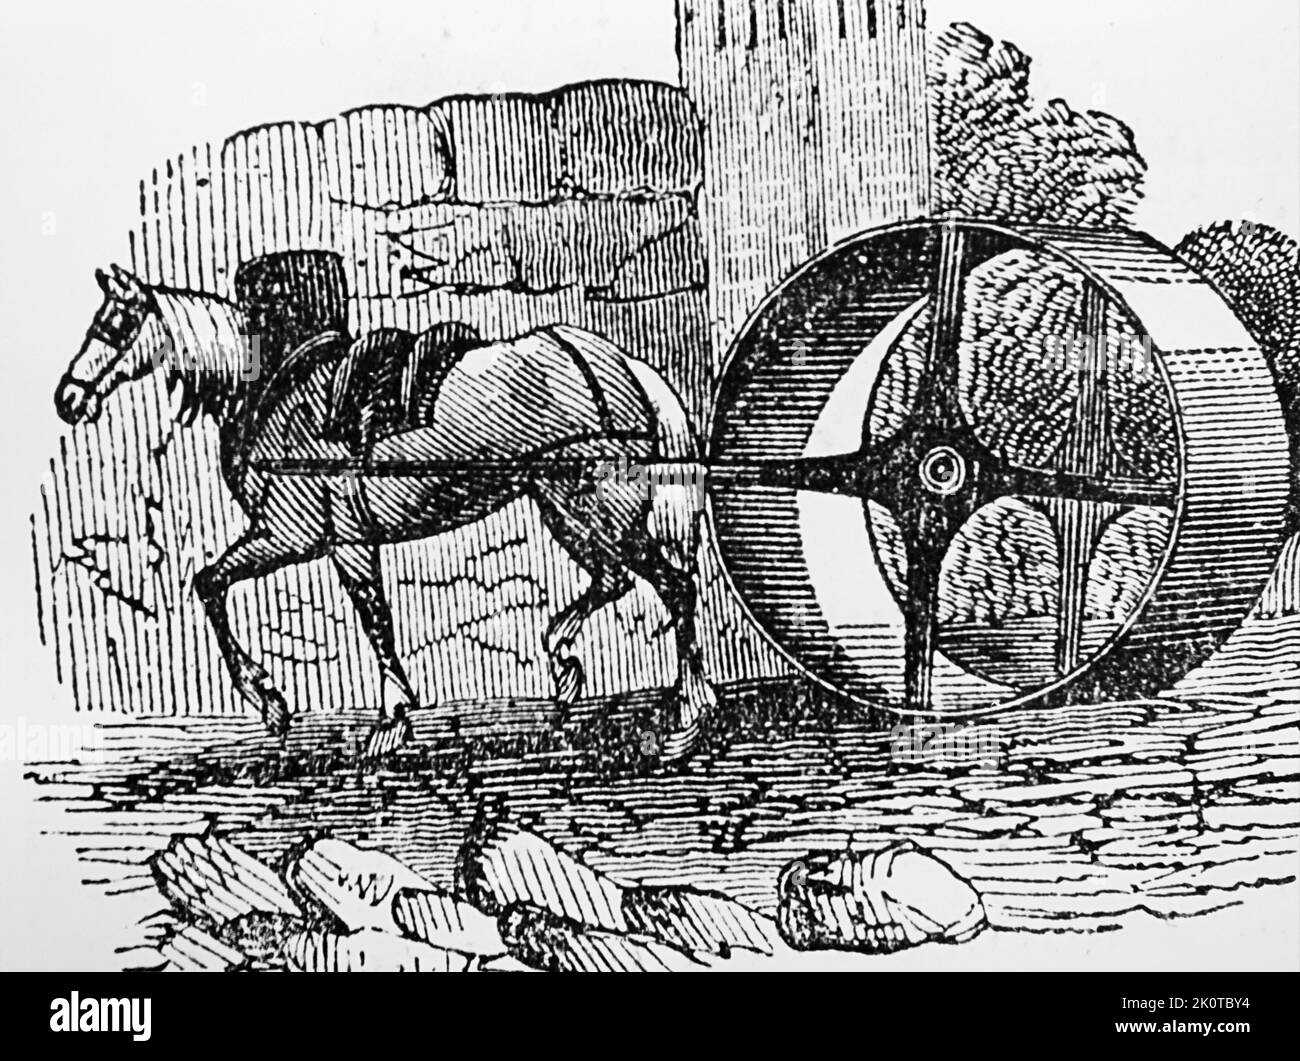 Illustration titled 'Roadmaking' depicting a horse pulling a roller to smooth down the road surface. Dated 19th Century Stock Photo